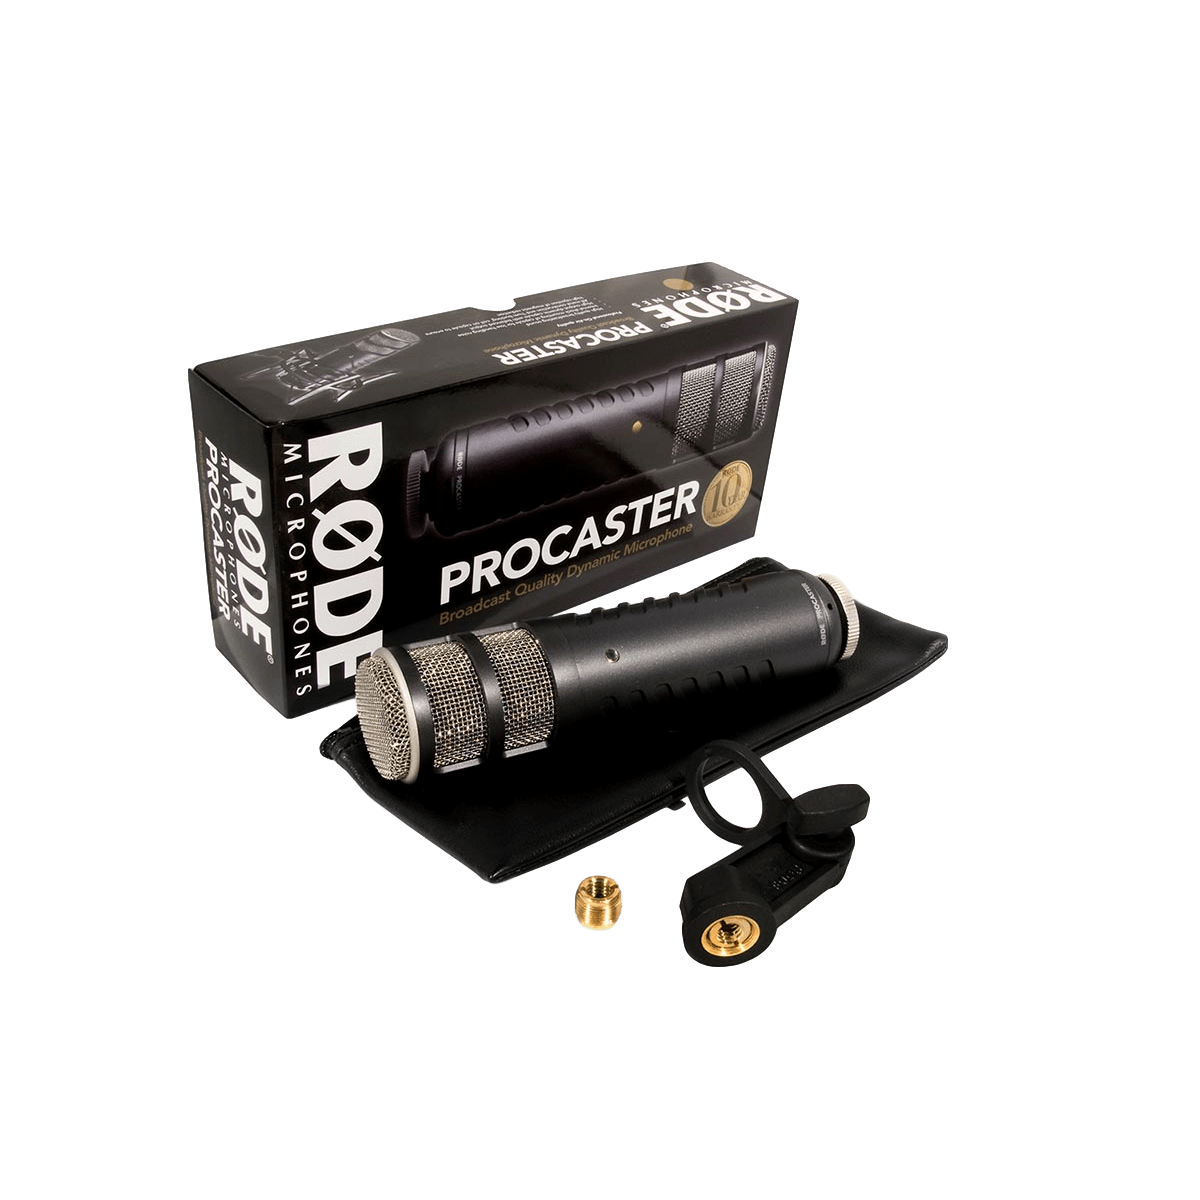 Rode Recording Rode Procaster Broadcast Quality Dynamic Microphone - Byron Music